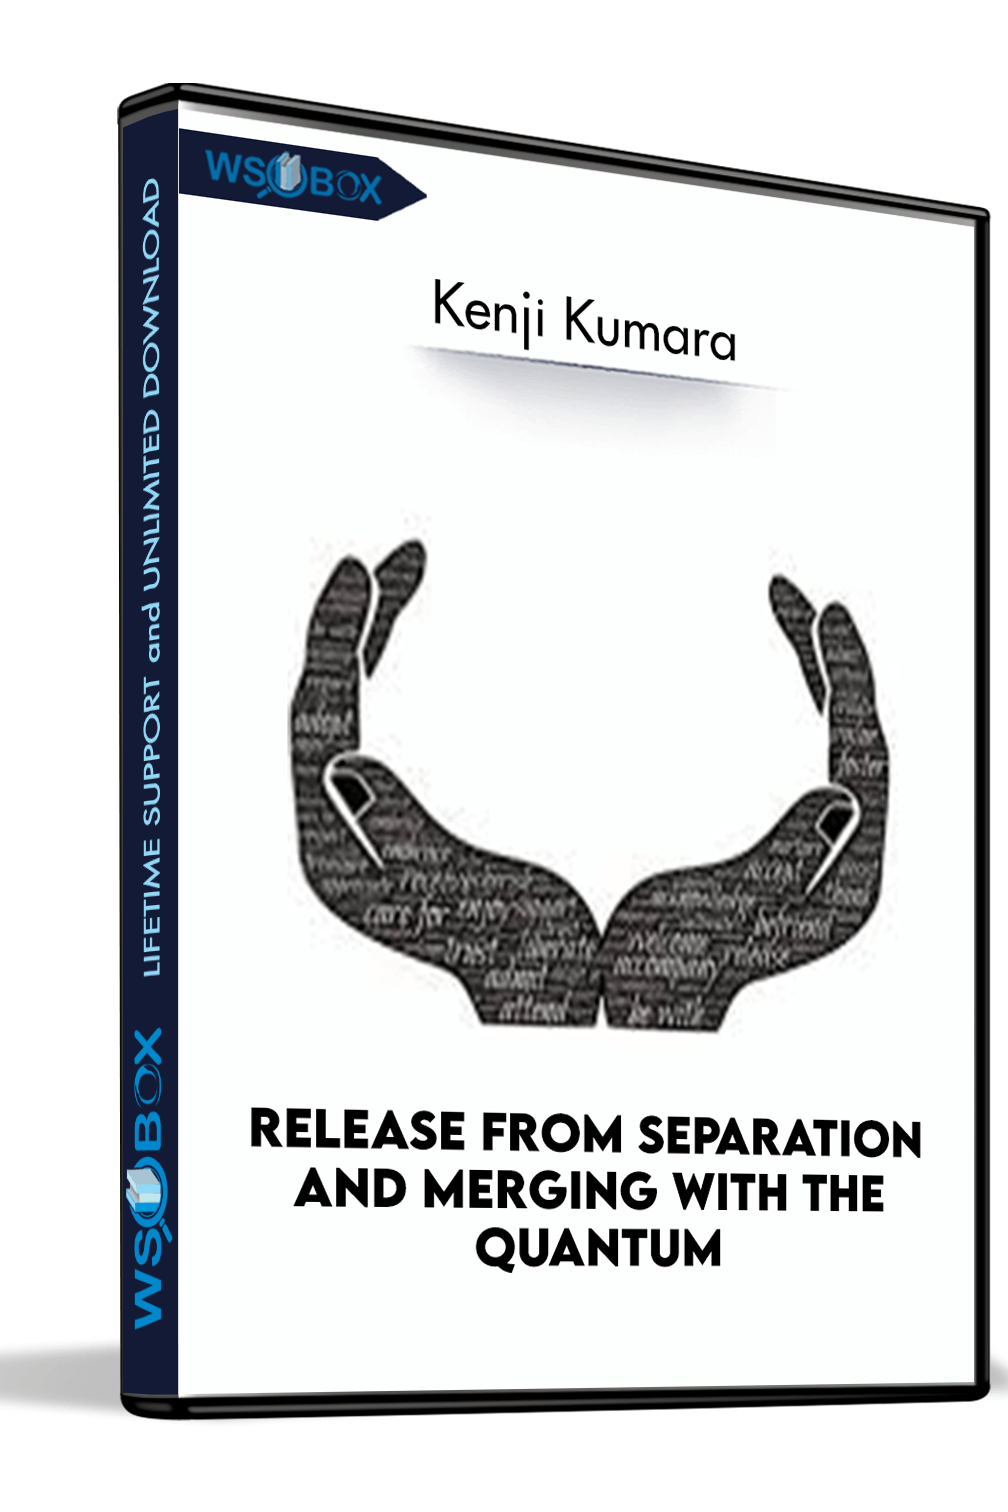 release-from-separation-and-merging-with-the-quantum-kenji-kumara